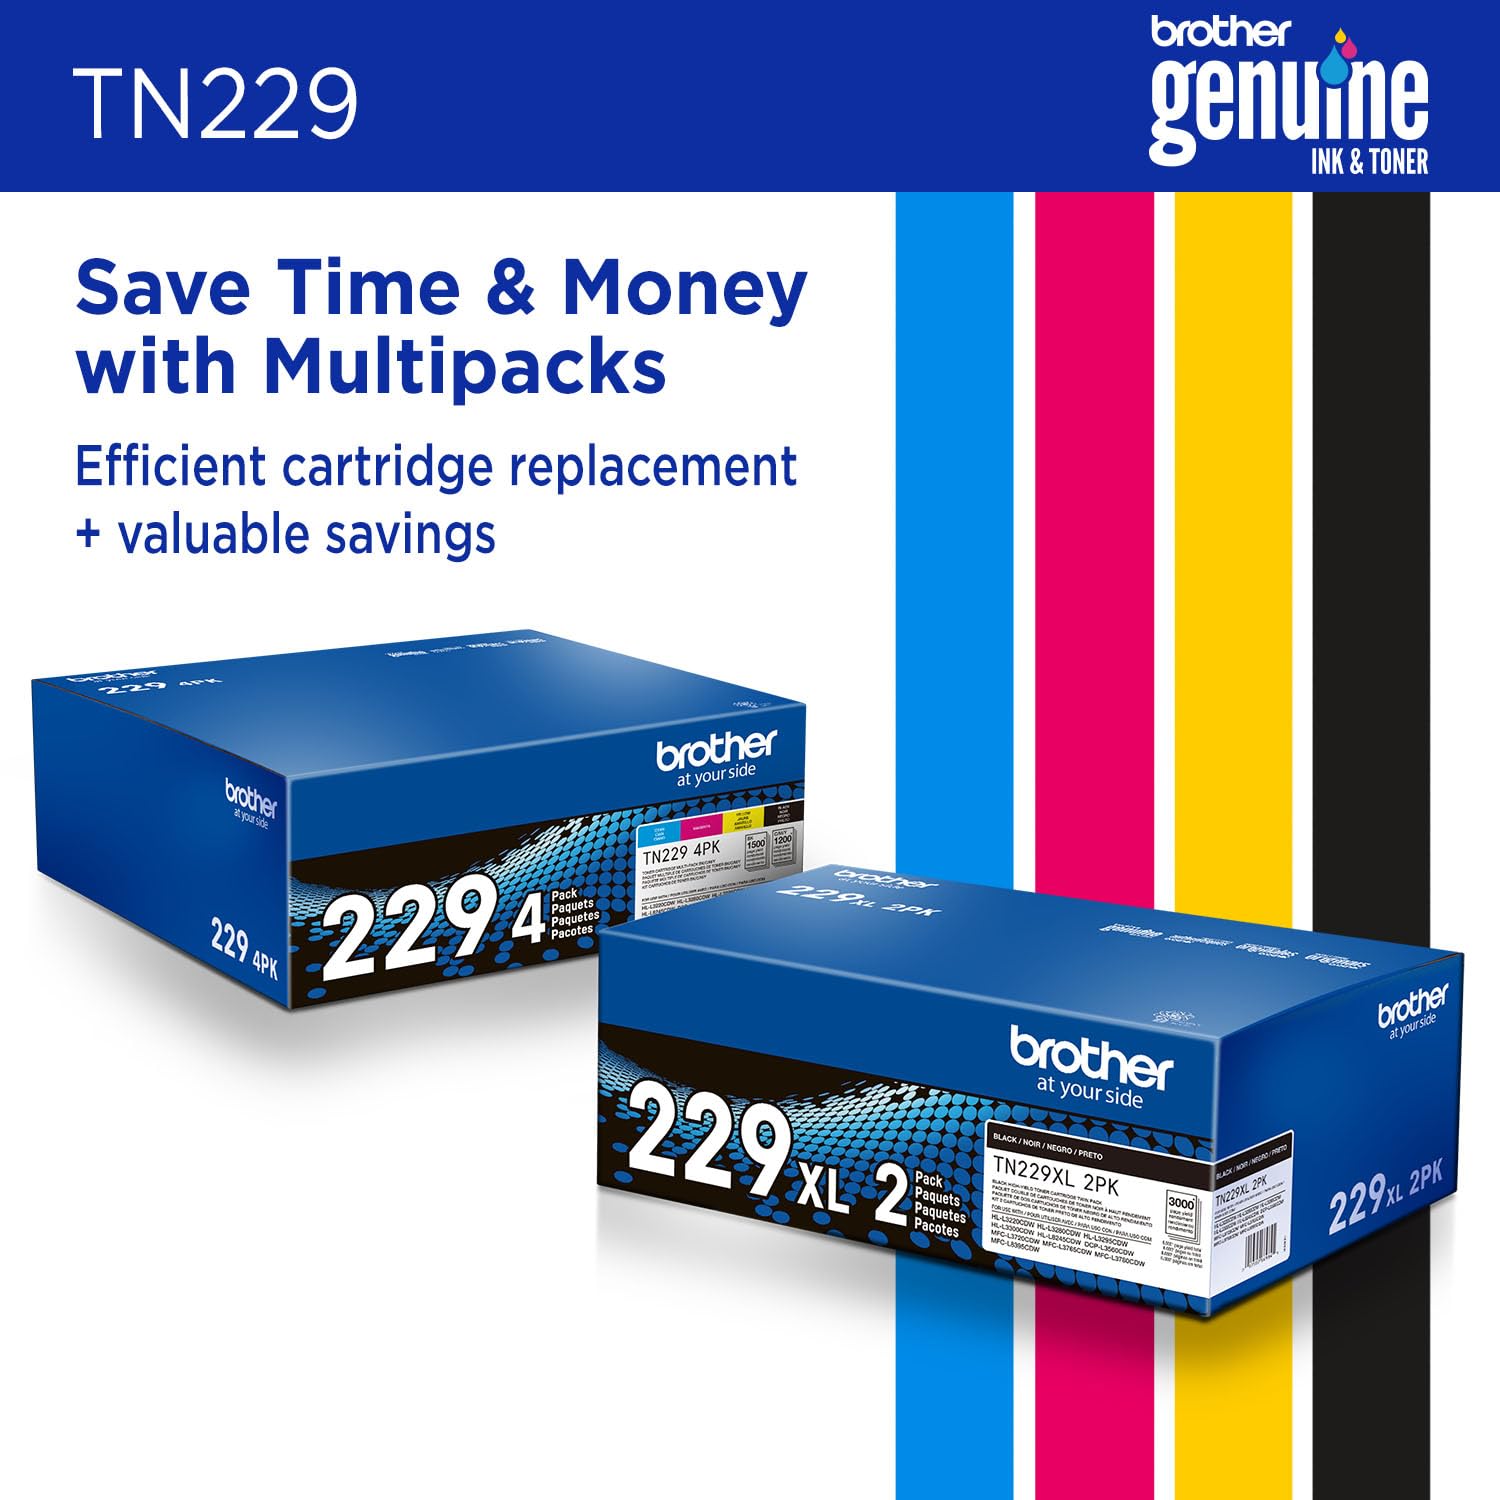 Brother Genuine TN229M Magenta Standard Yield Printer Toner Cartridge - Print up to 1,200 Pages(1)